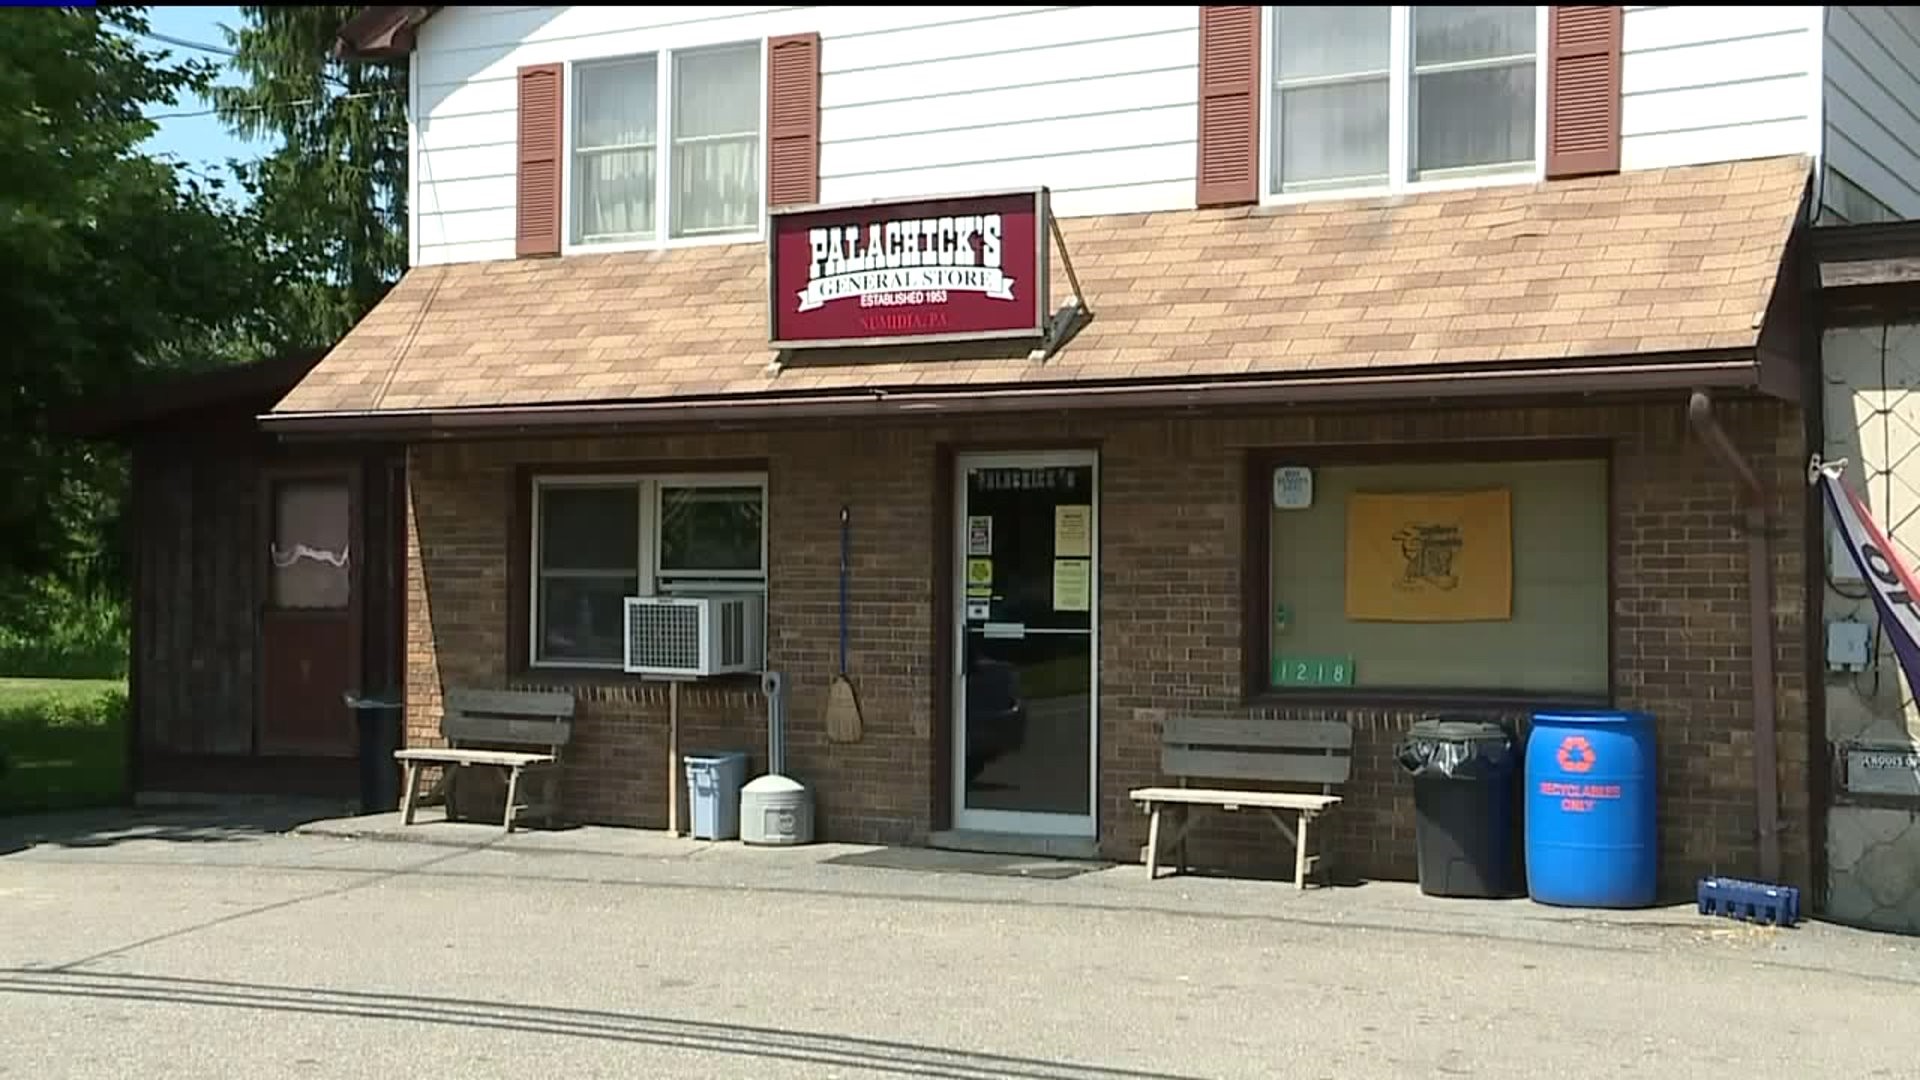 Palachick`s General Store Closing